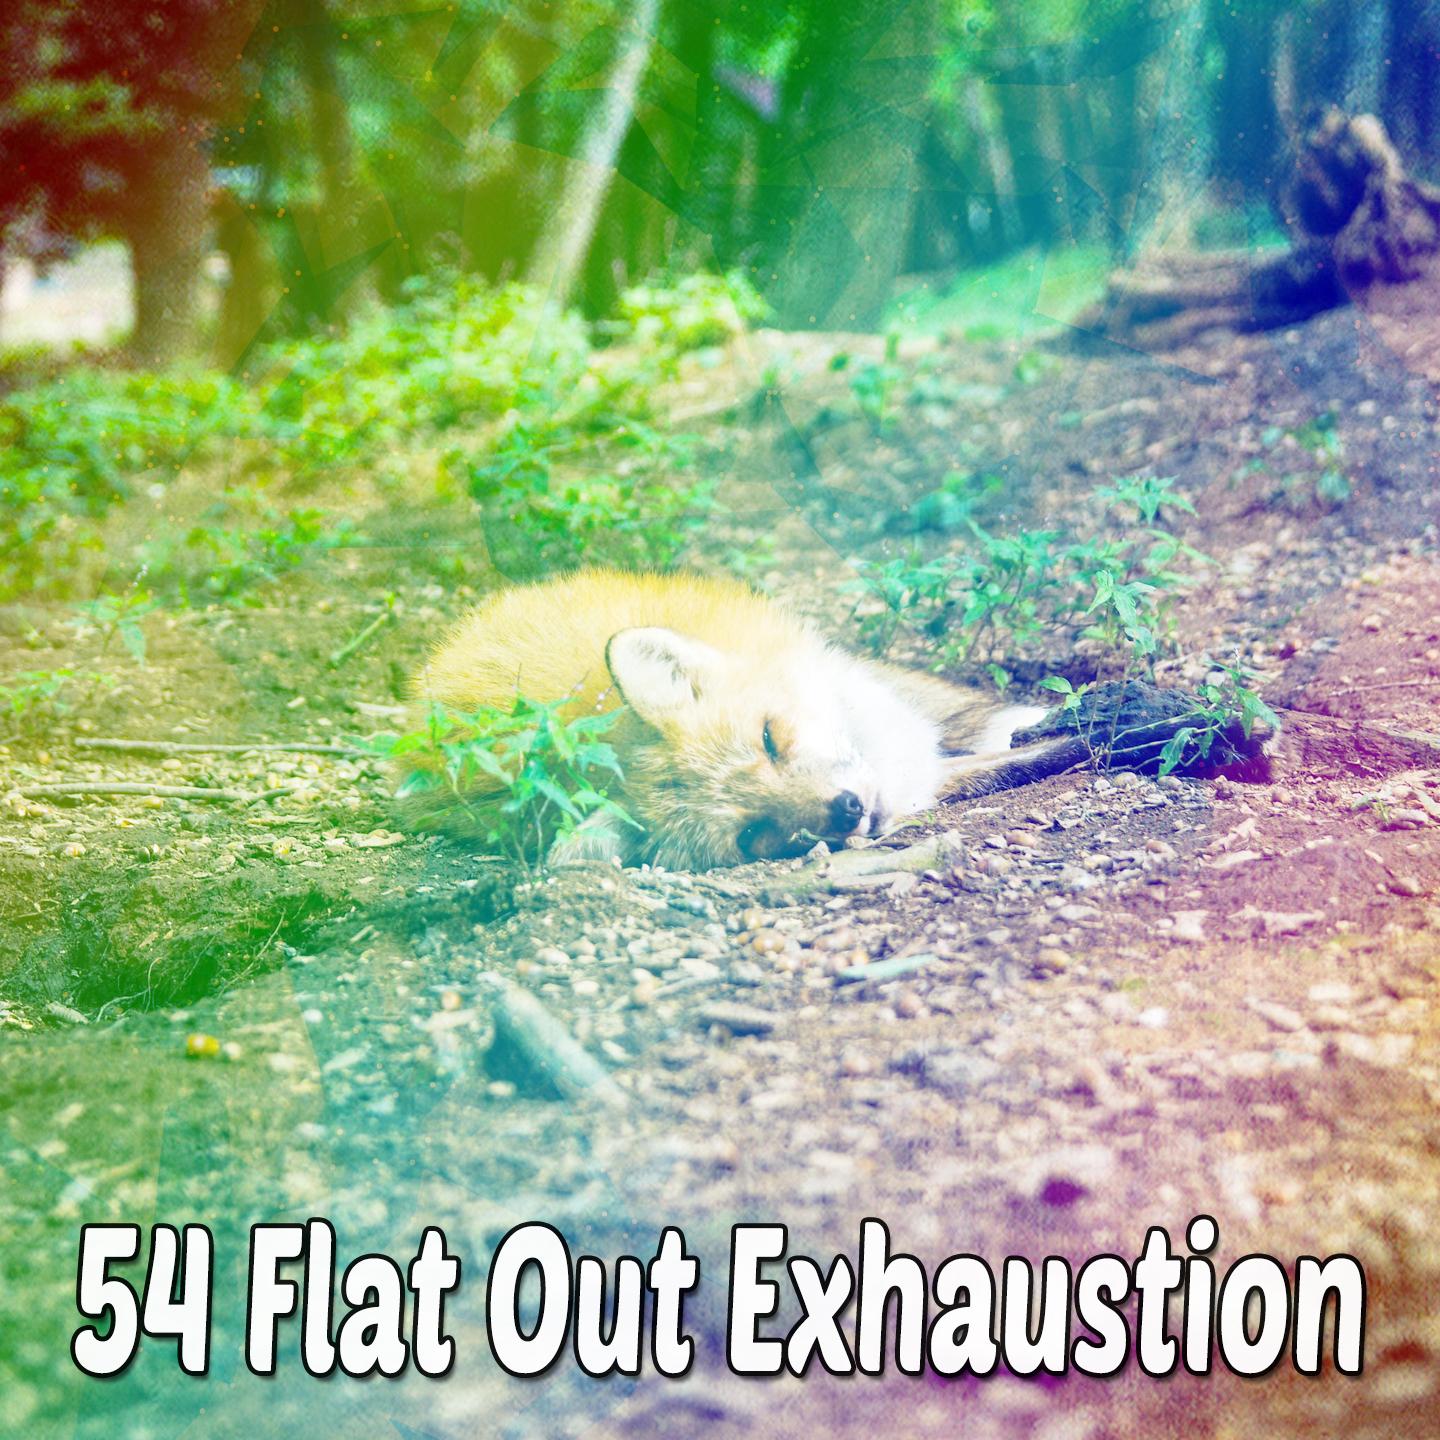 54 Flat out Exhaustion